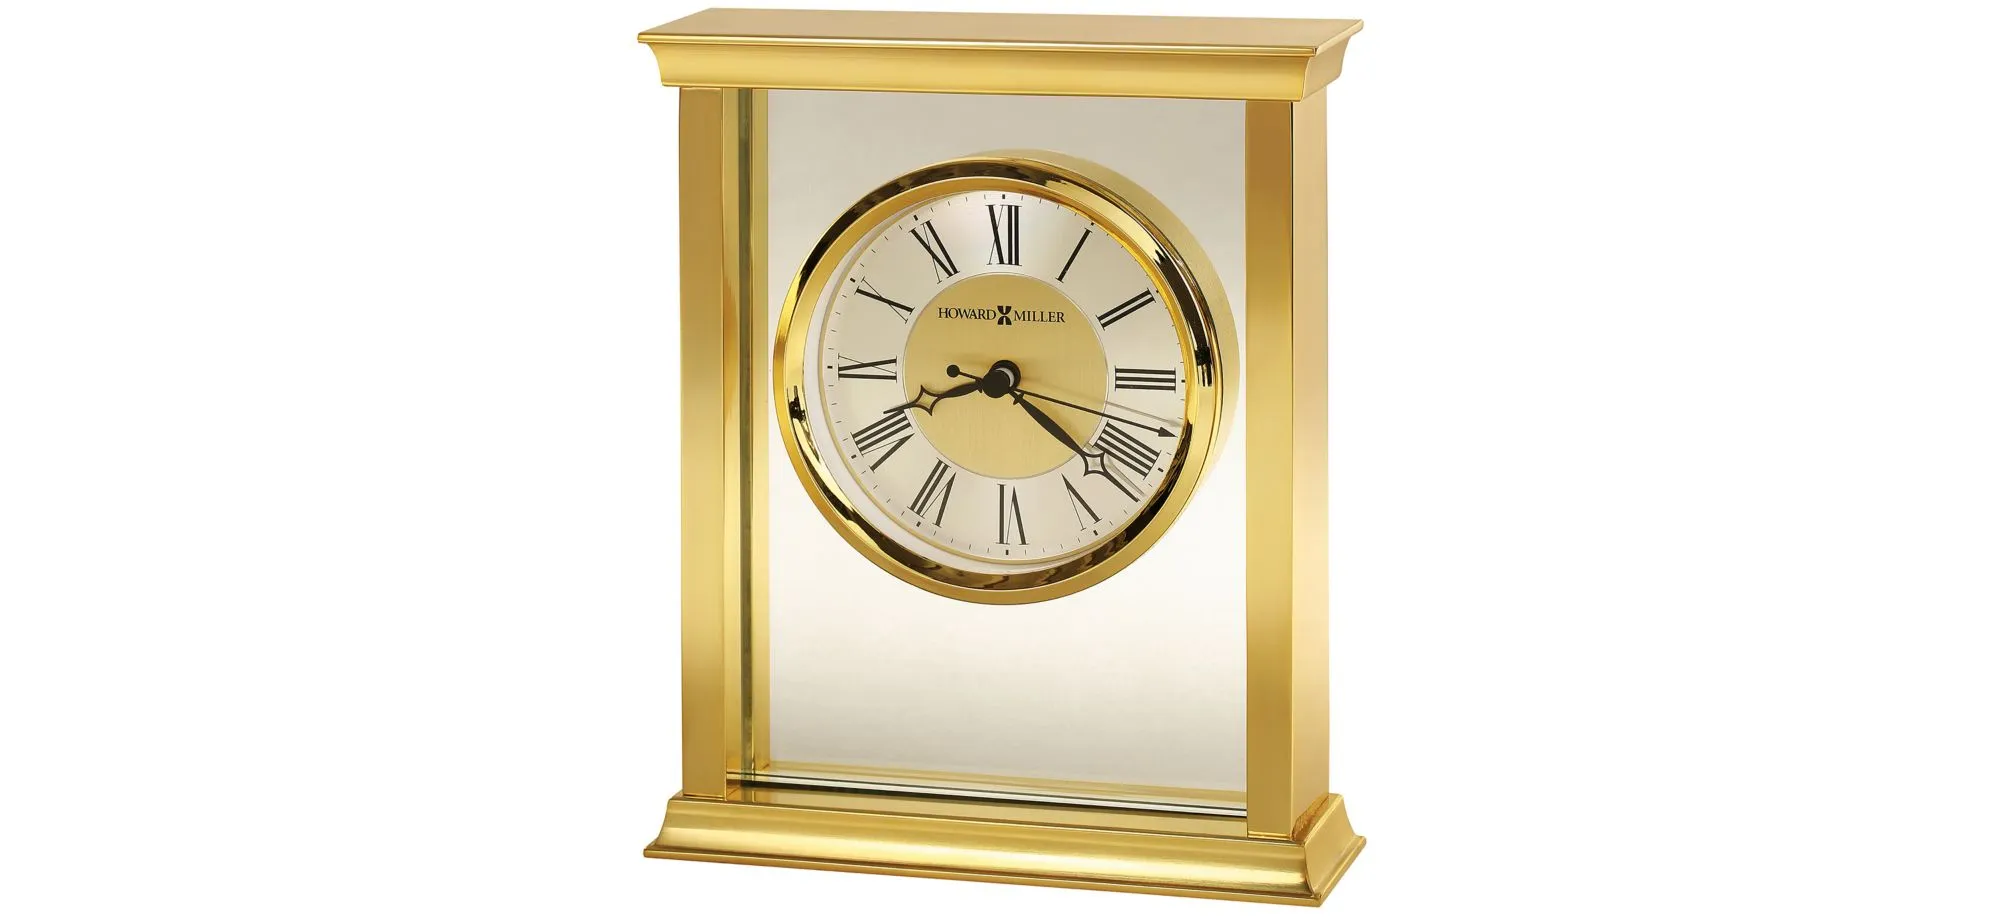 Monticello Tabletop Clock in Gold by Howard Miller